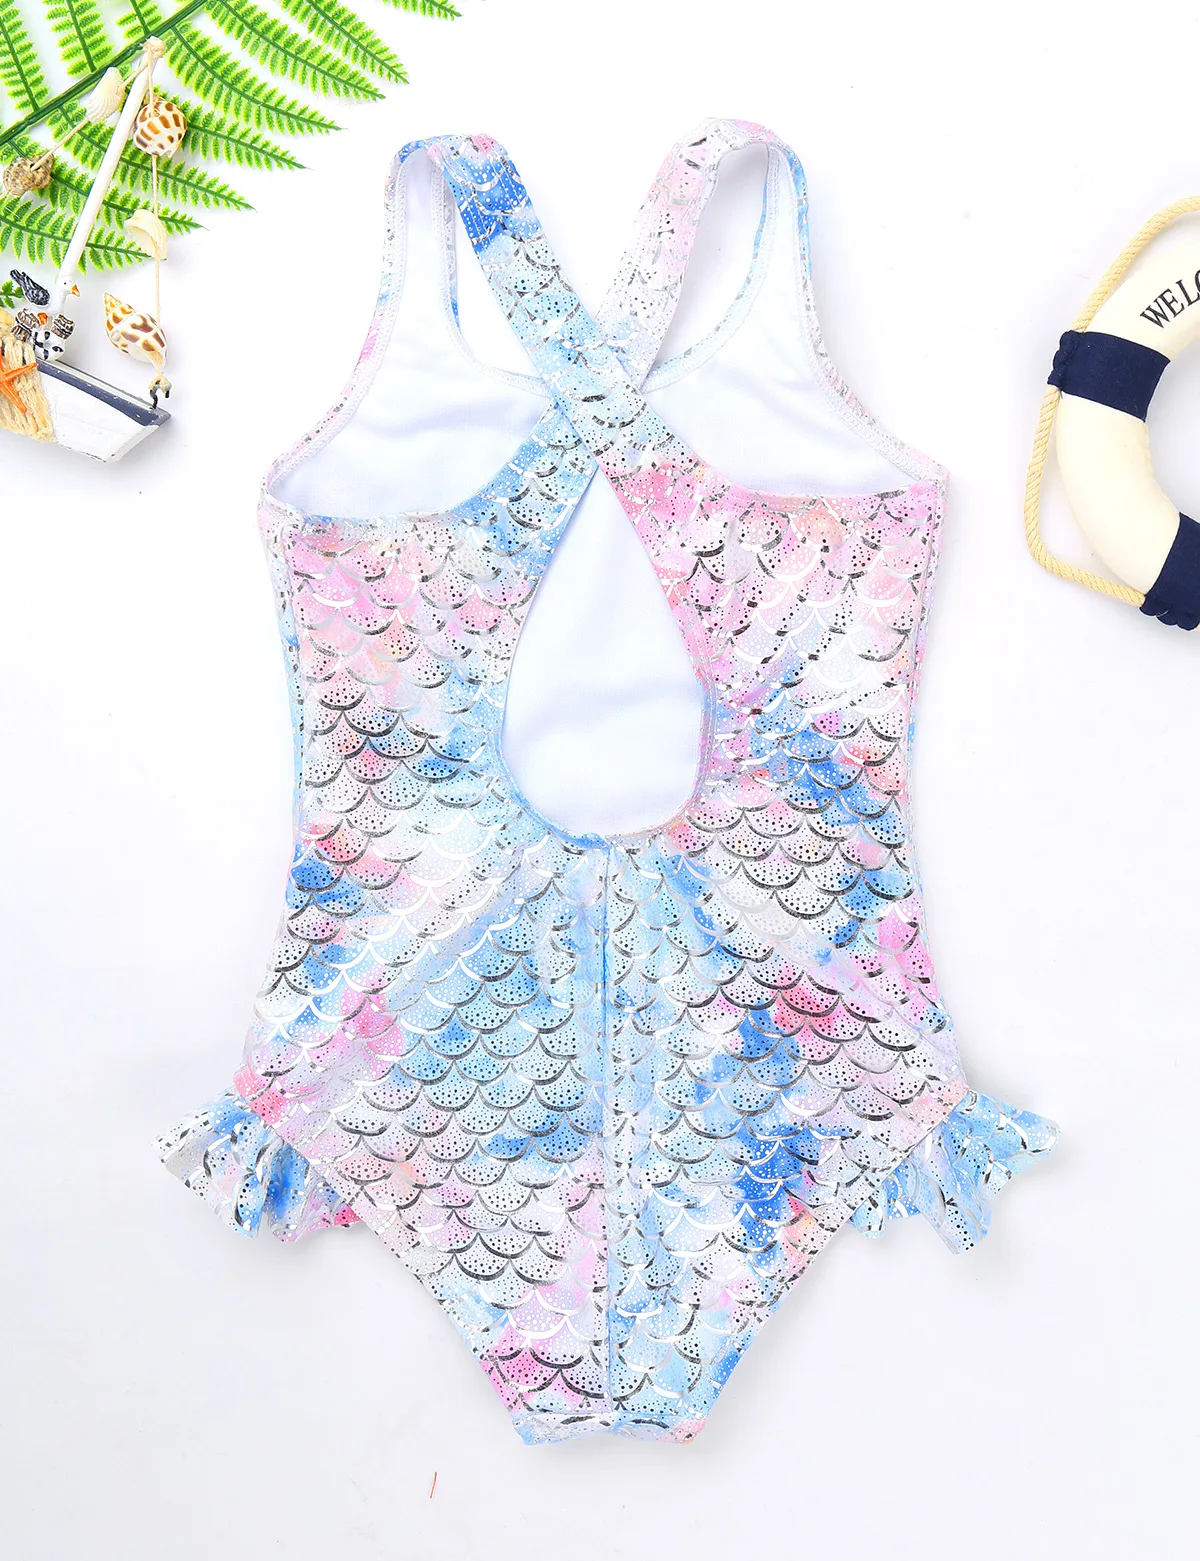 MSemis Kids Girls Colorful Fish Scales Swimsuits One Piece Quick Dry Bikini Bathing Suit 